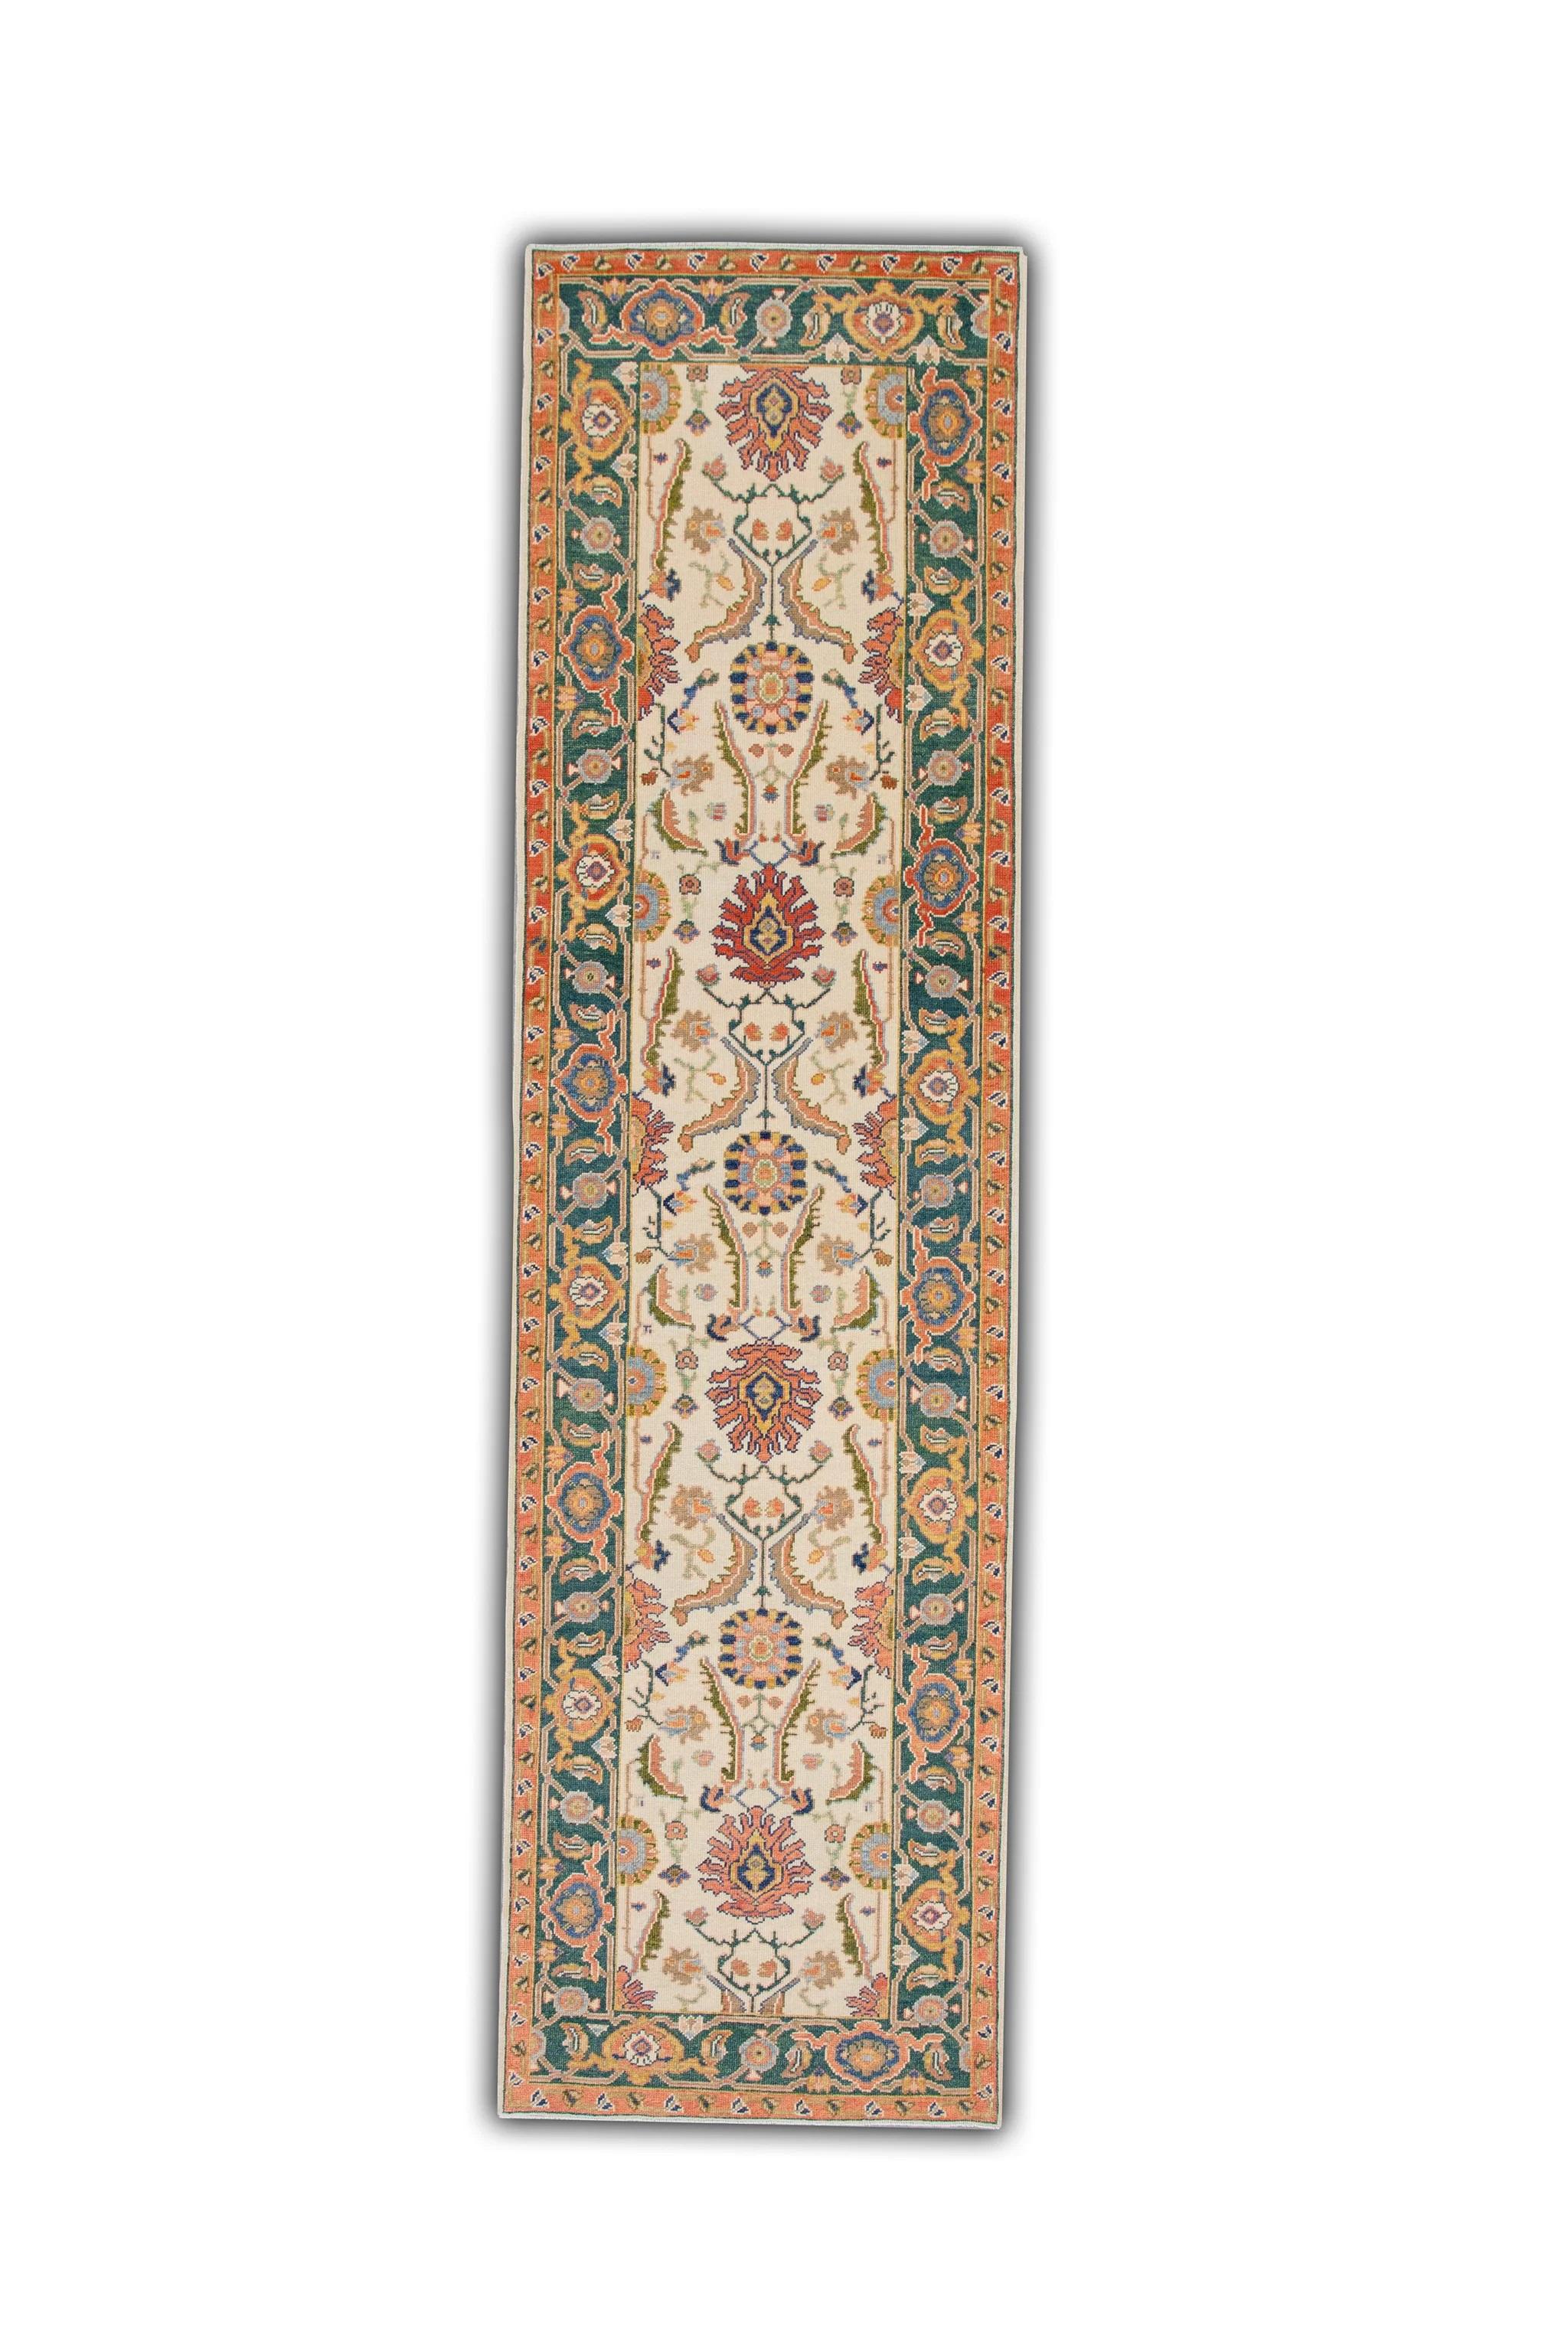 Floral Turkish Finewoven Wool Oushak Rug in Cream, Green, and Red 2'9